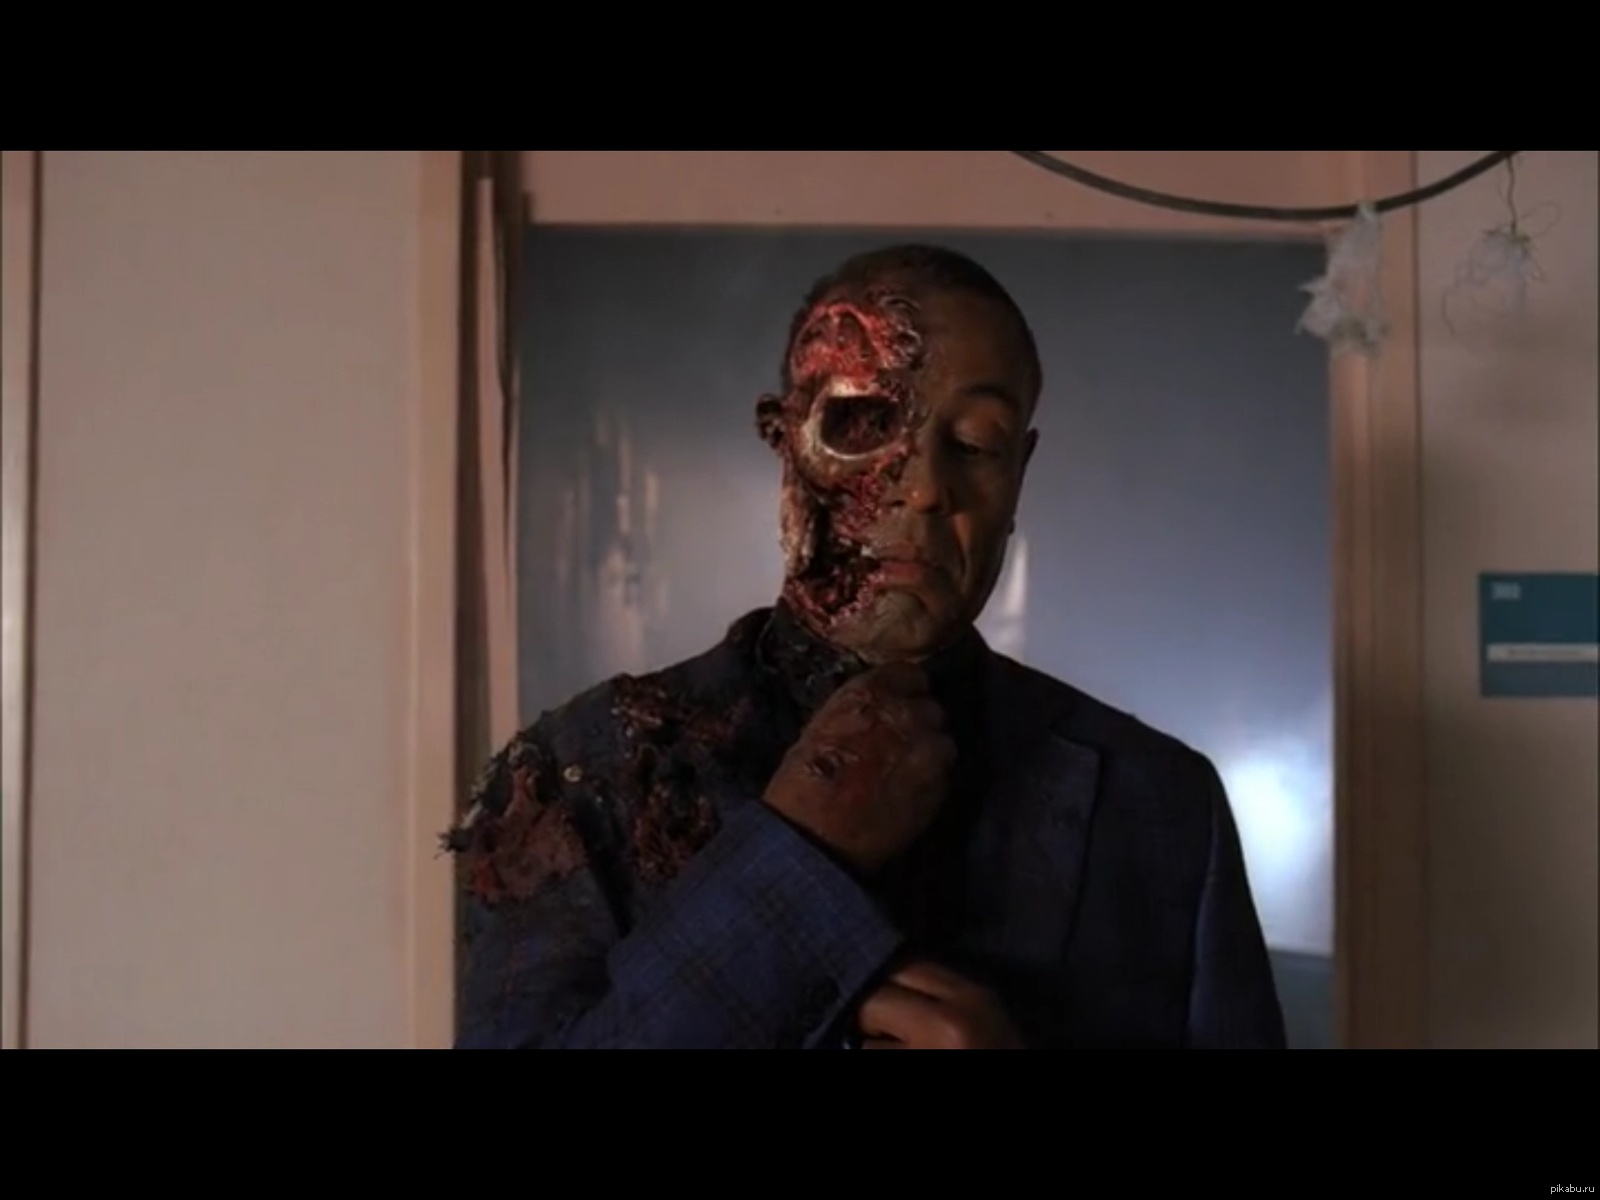 Everyone must have gone nuts at this point. - NSFW, My, Breaking Bad, Spoiler, , Explosion, Guus Hidding